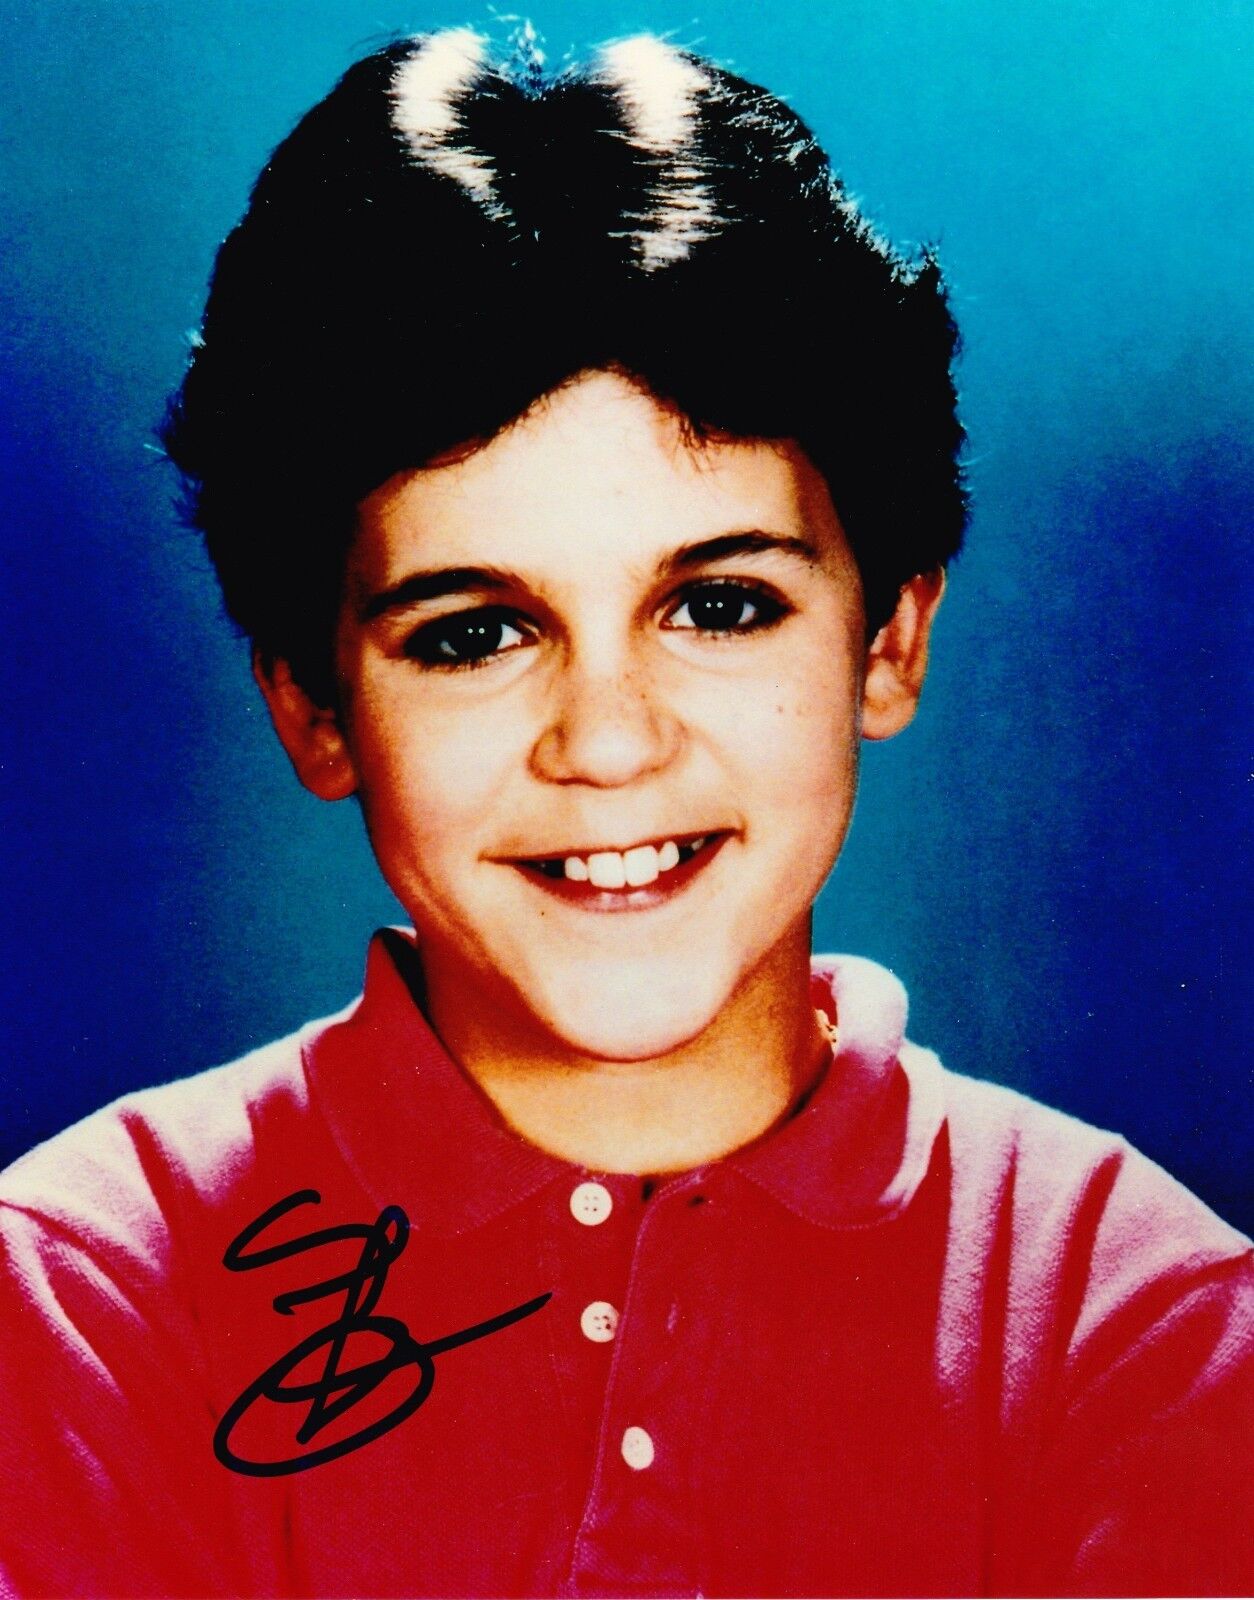 FRED SAVAGE SIGNED 8X10 PHOTO THE WONDER YEARS KEVIN ARNOLD AUTOGRAPH COA B